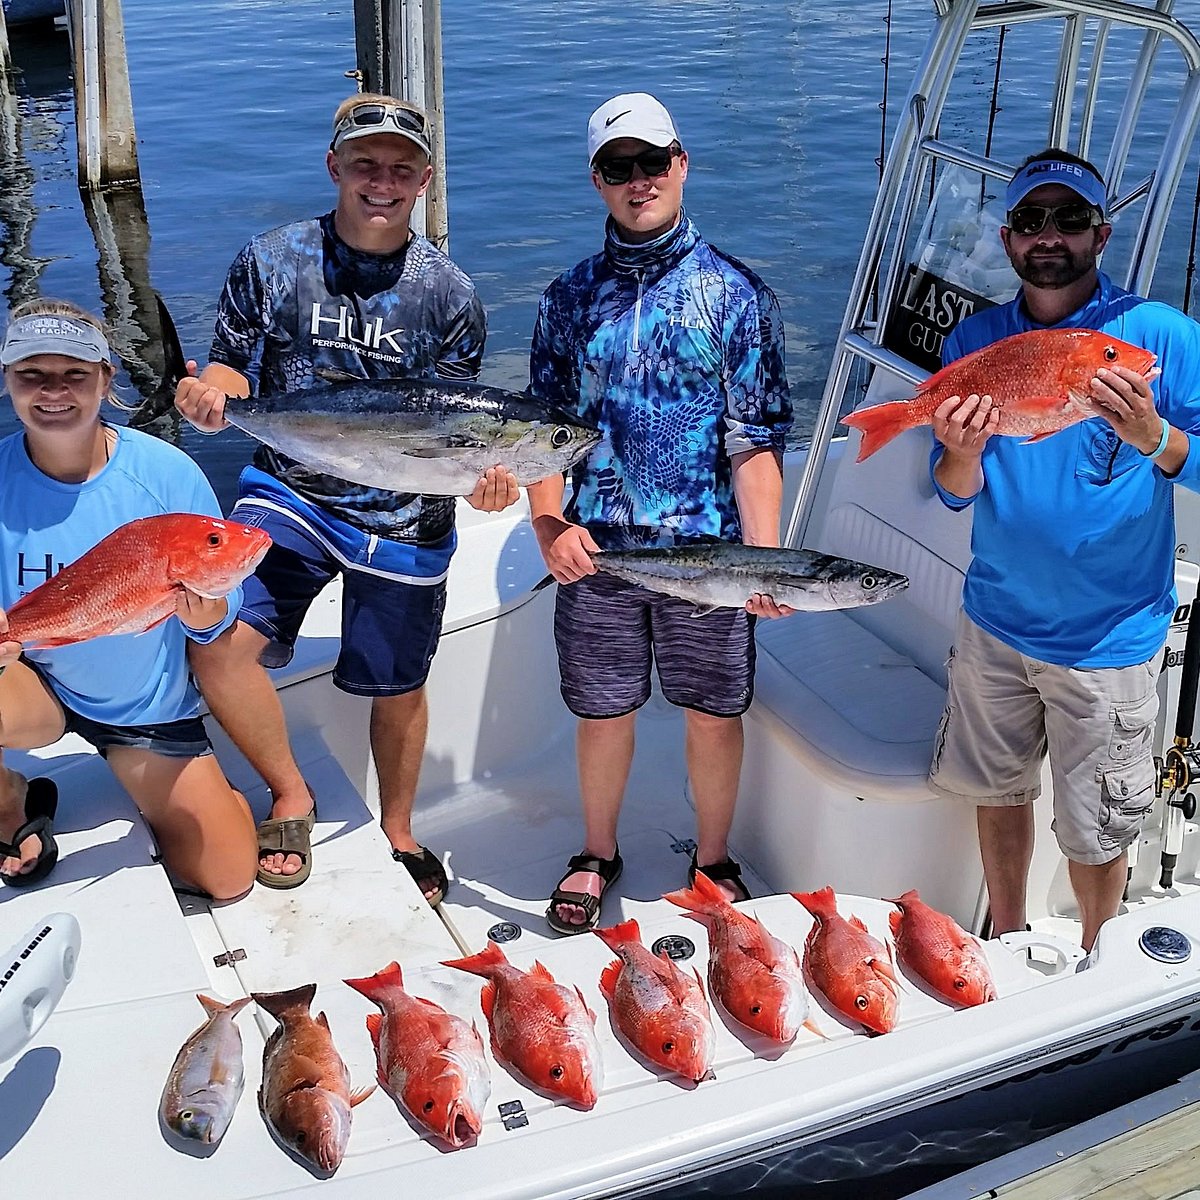 Florida Fishing Products Fishing Reel Review From a Guides Perspective, Captain's Corner, Fishing Boat Tours Charters and Marine Wildlife